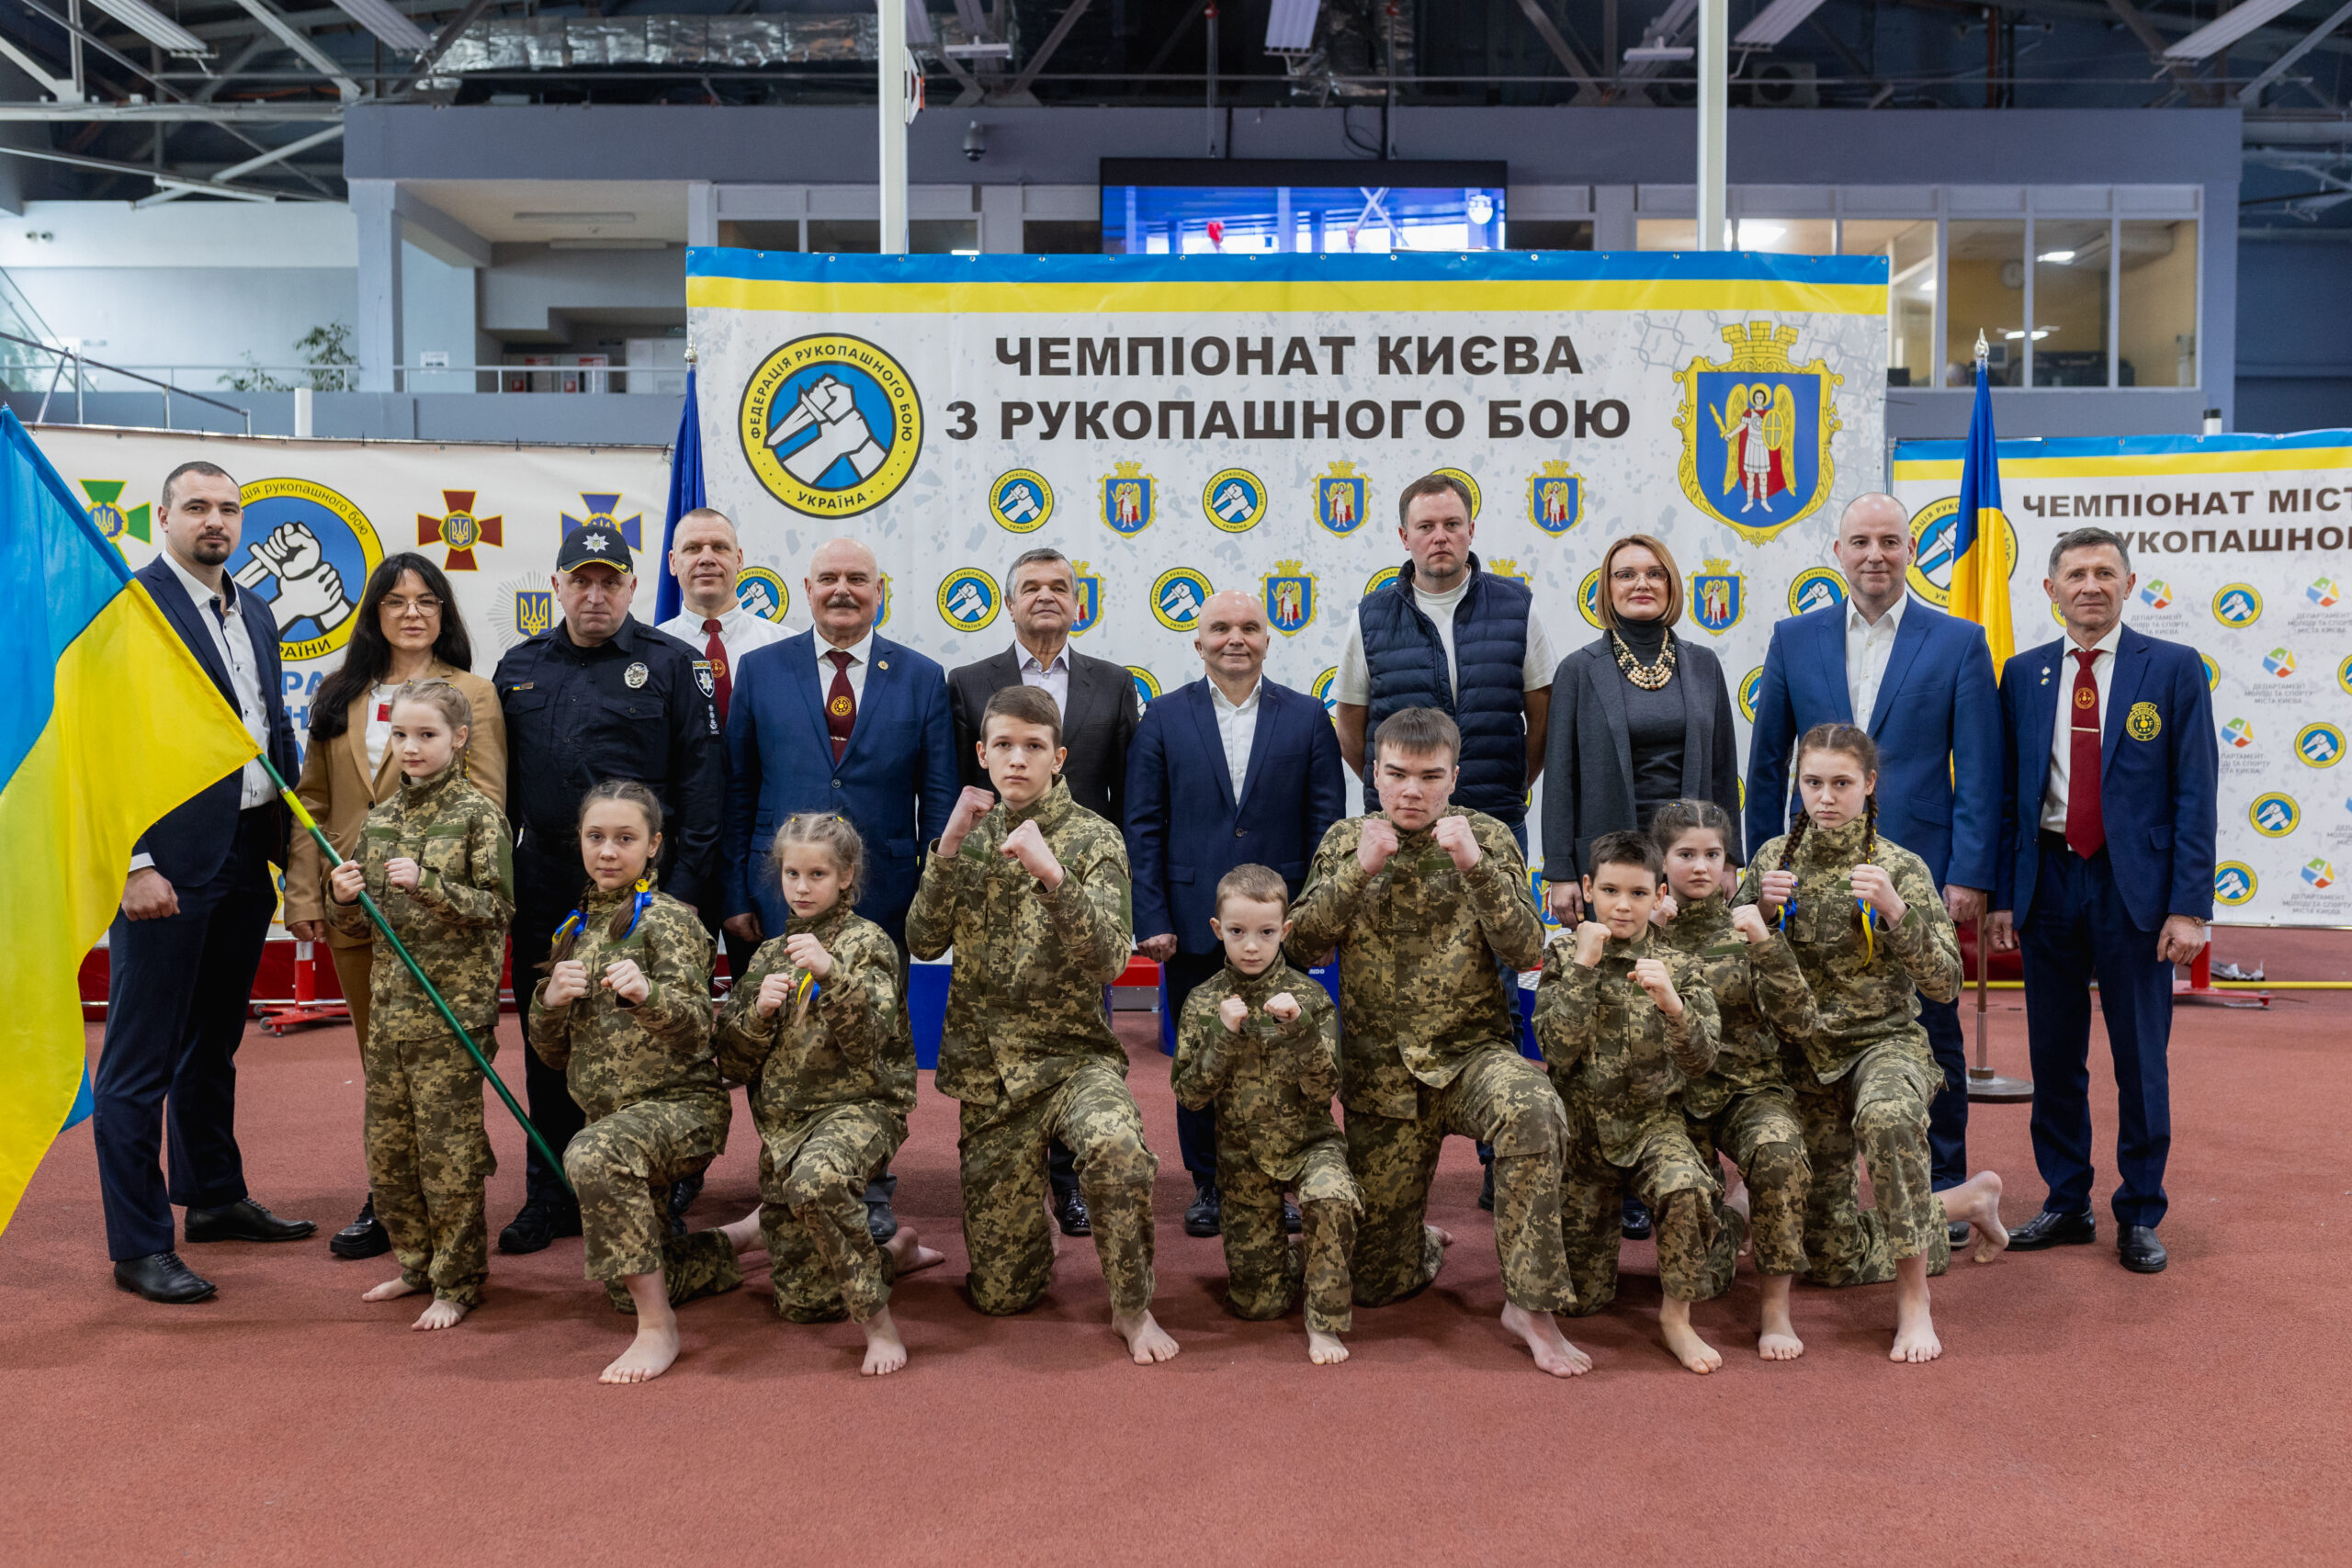 Successful holding of the Open Championship of the city of Kyiv in hand-to-hand combat